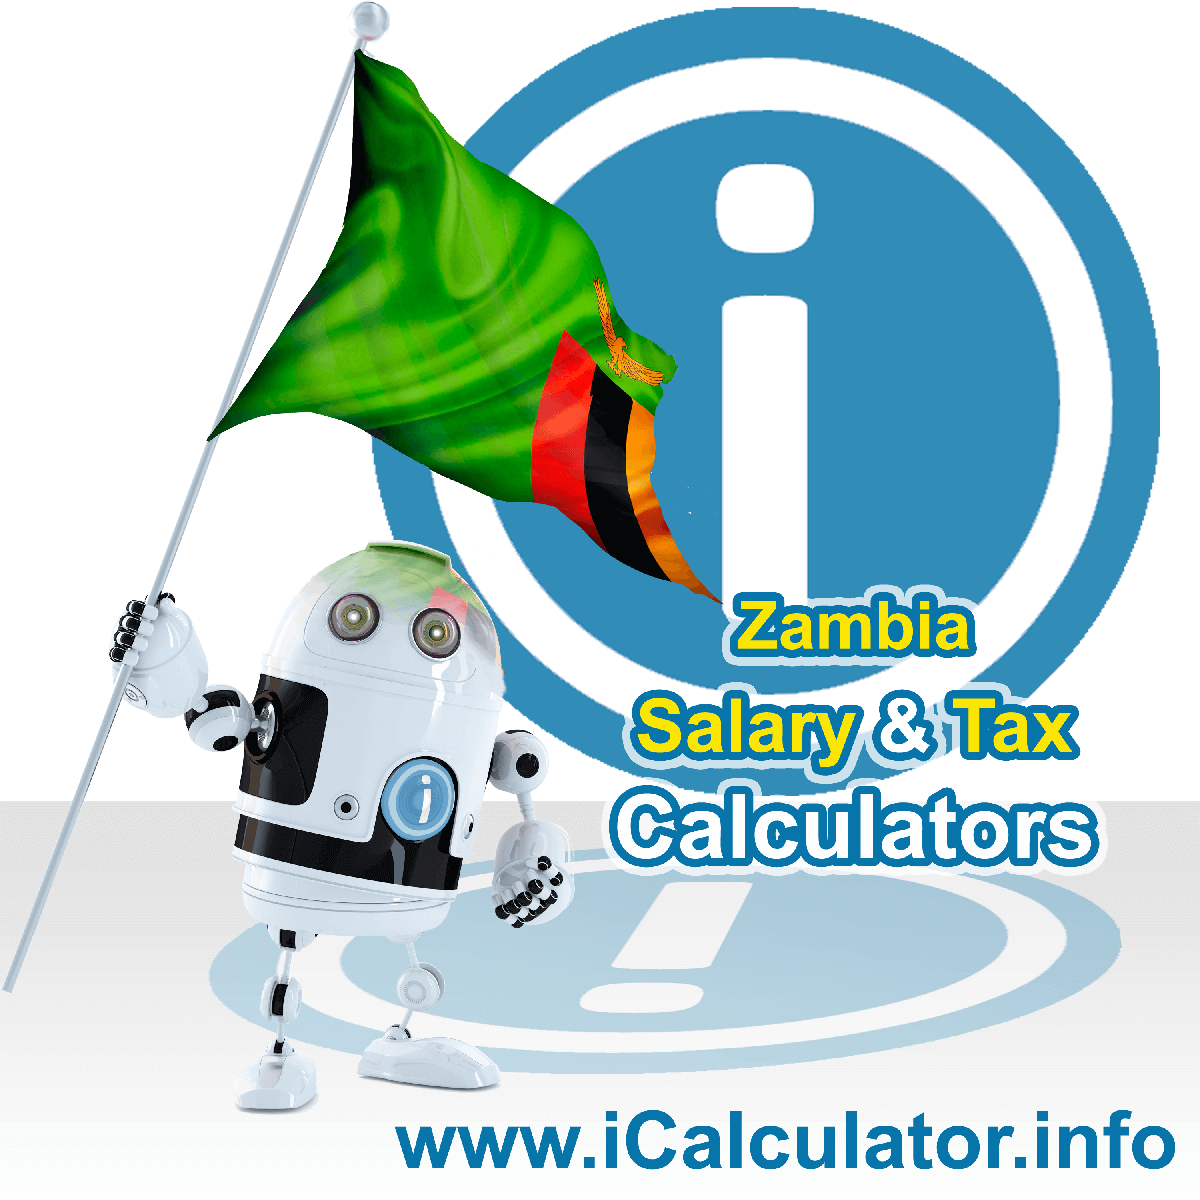 Zambia Tax Calculator. This image shows the Zambia flag and information relating to the tax formula for the Zambia Salary Calculator